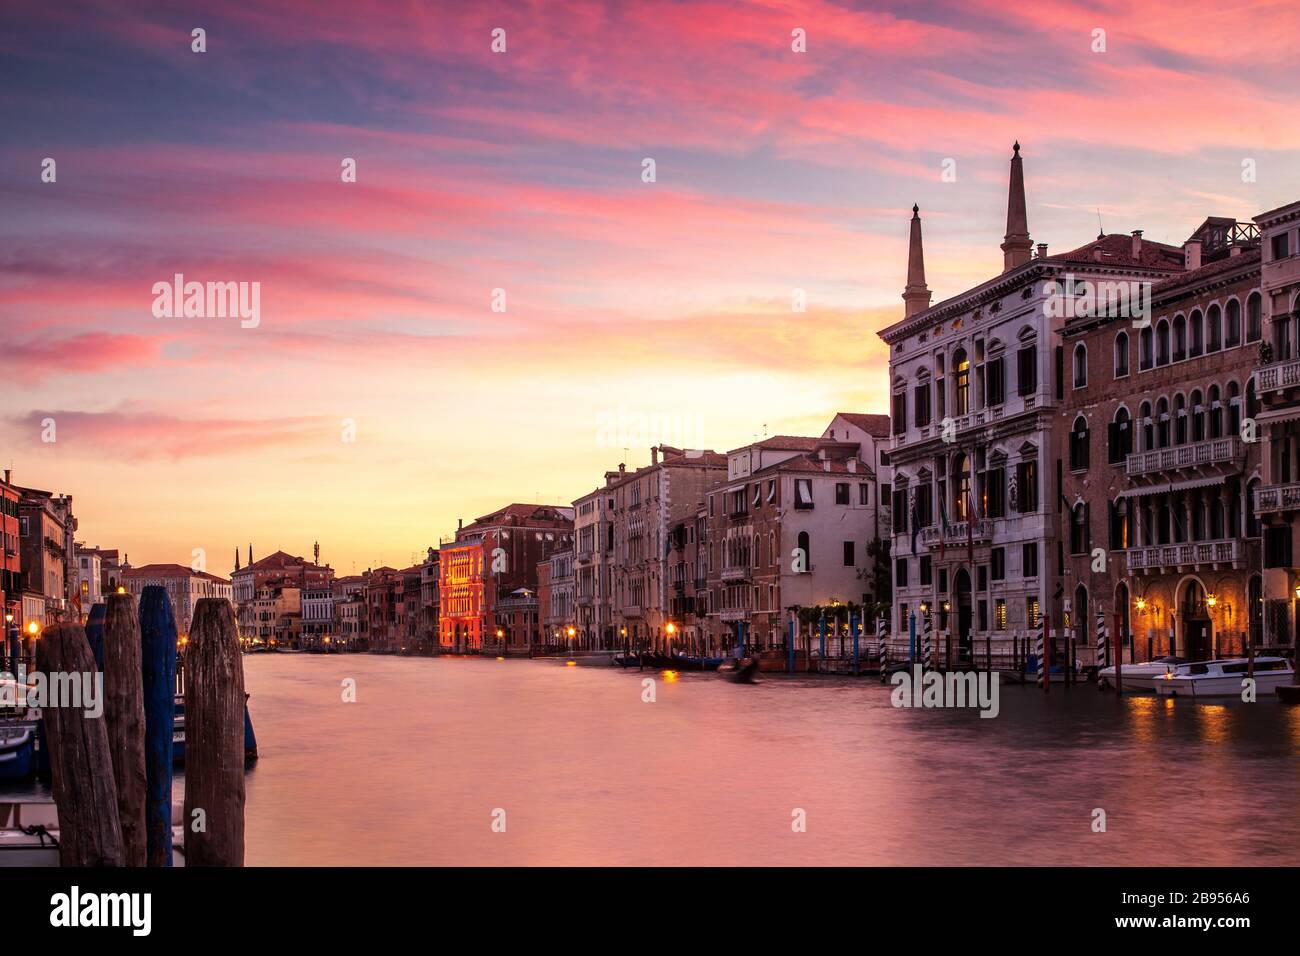 Sunrise over the Grand Canal in Venice, Italy Stock Photo